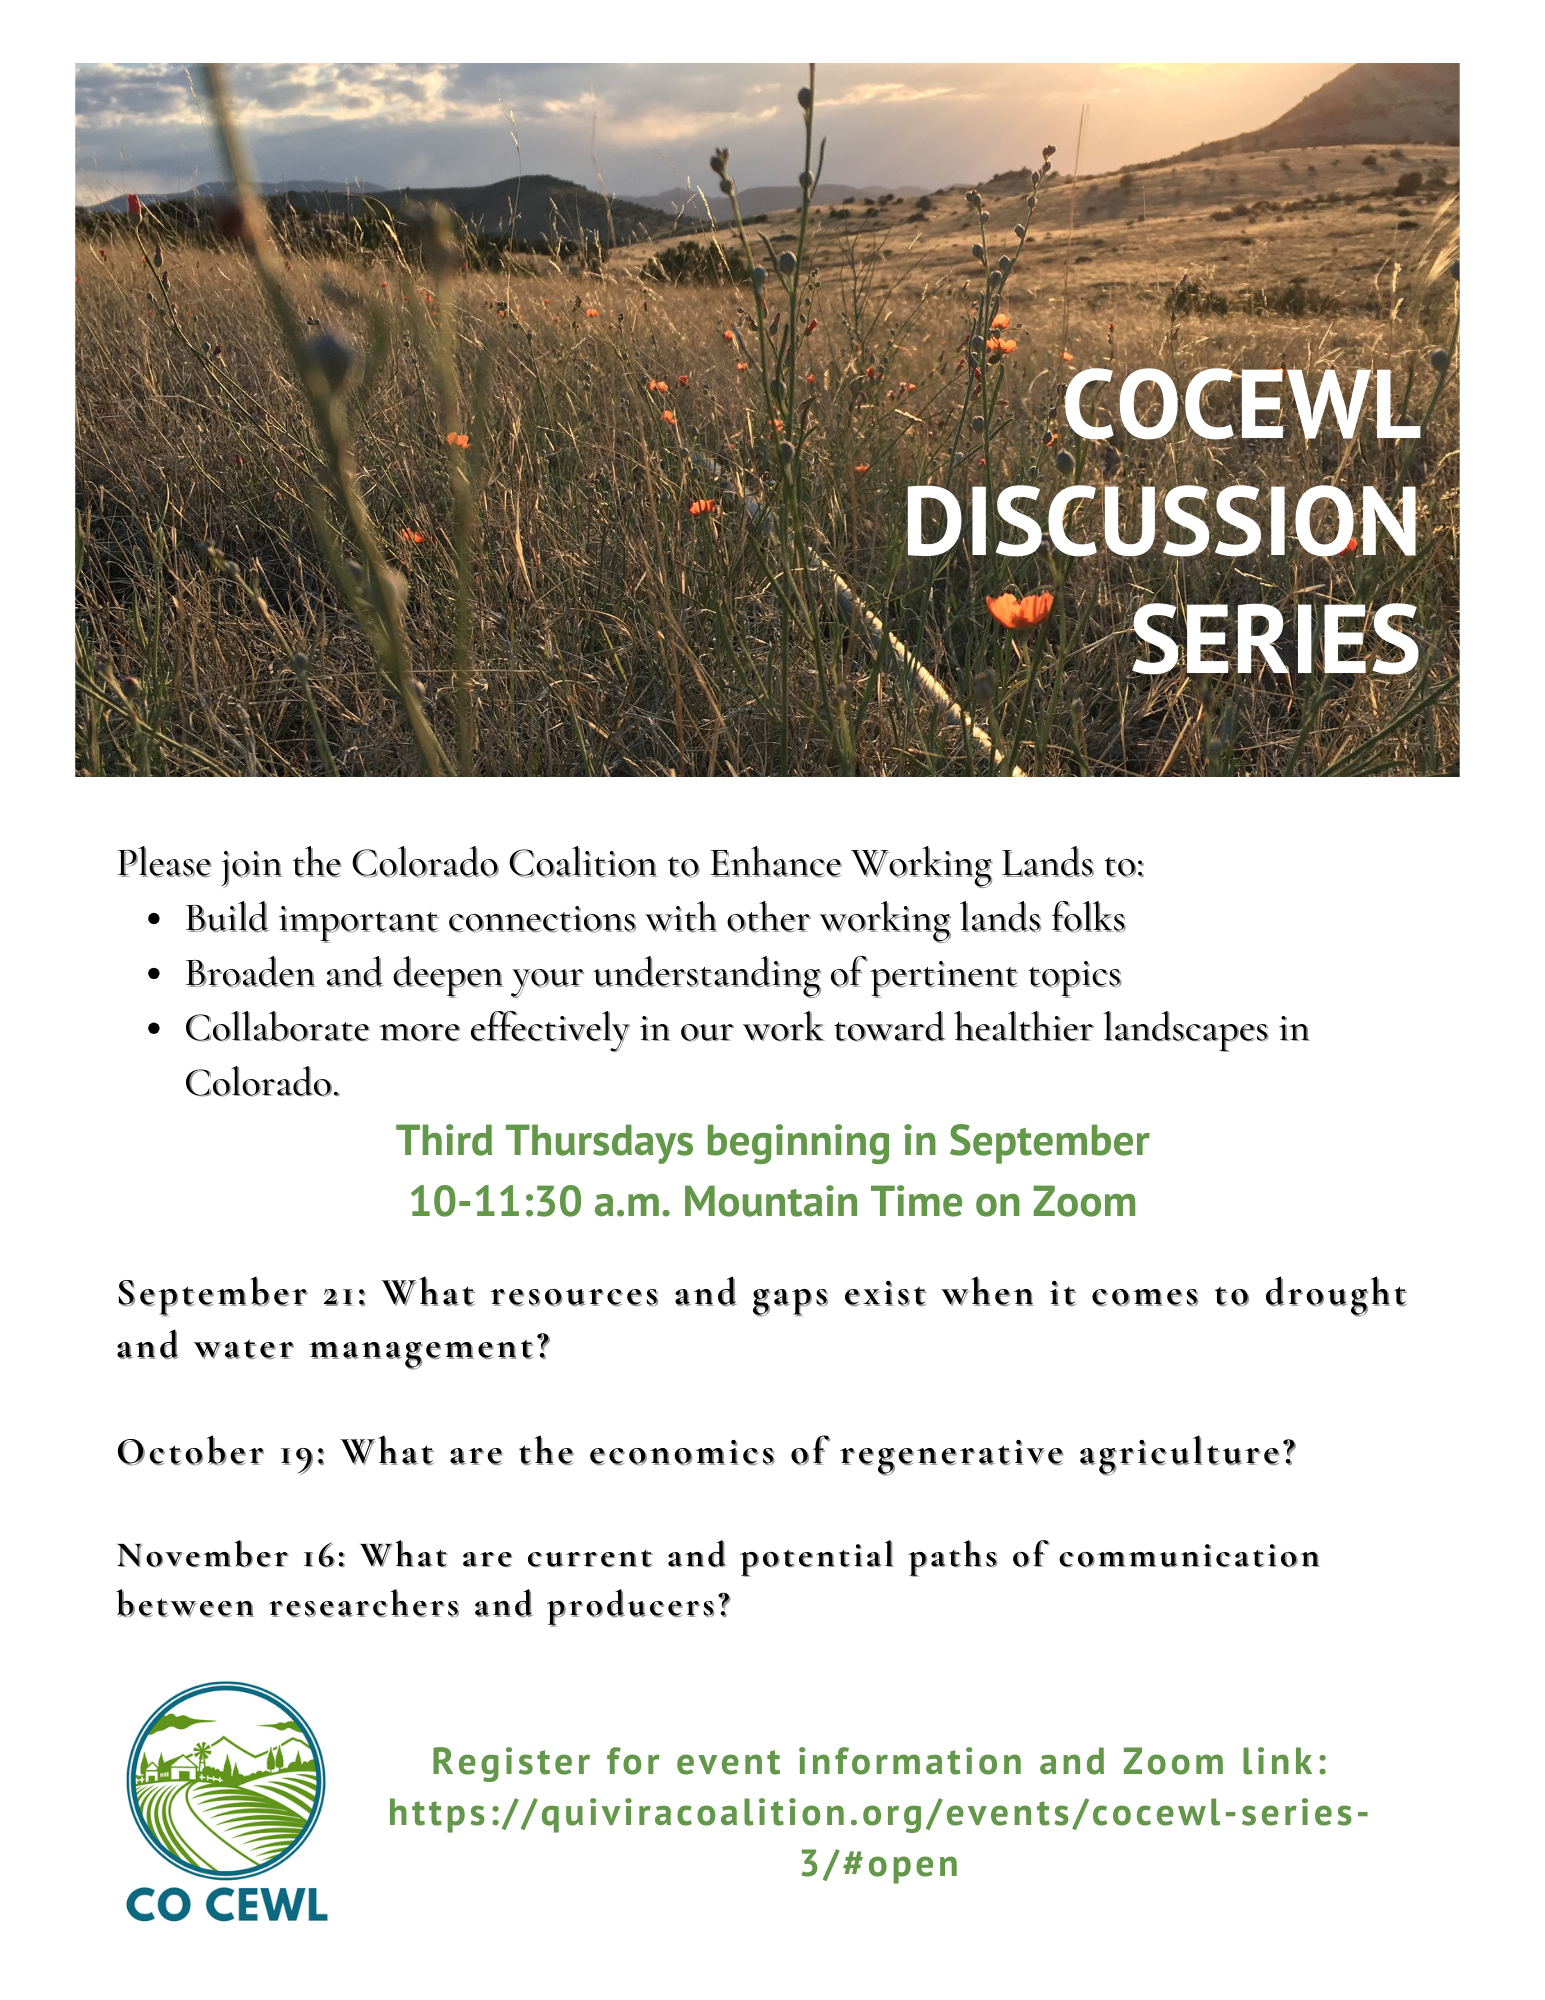 COCEWL Discussion Series